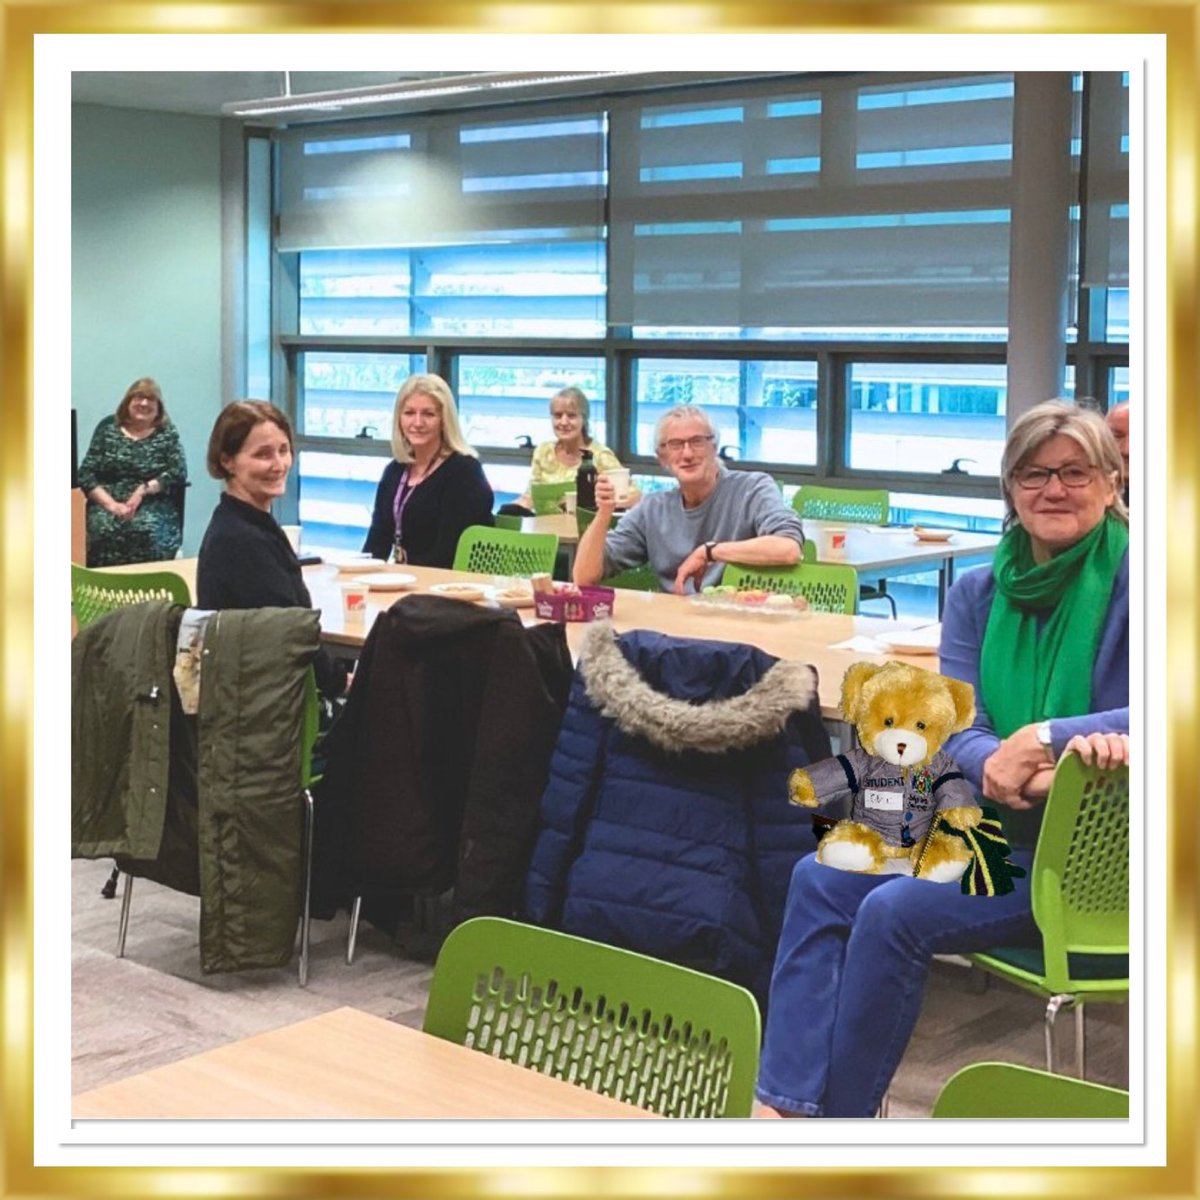 It’s nearly the end of a busy week for Stan.He can now reflect on the session that he spent with the university service user and carer group. The session he listened to was about equality, diversity and inclusion. @NursingTimes #STANBear